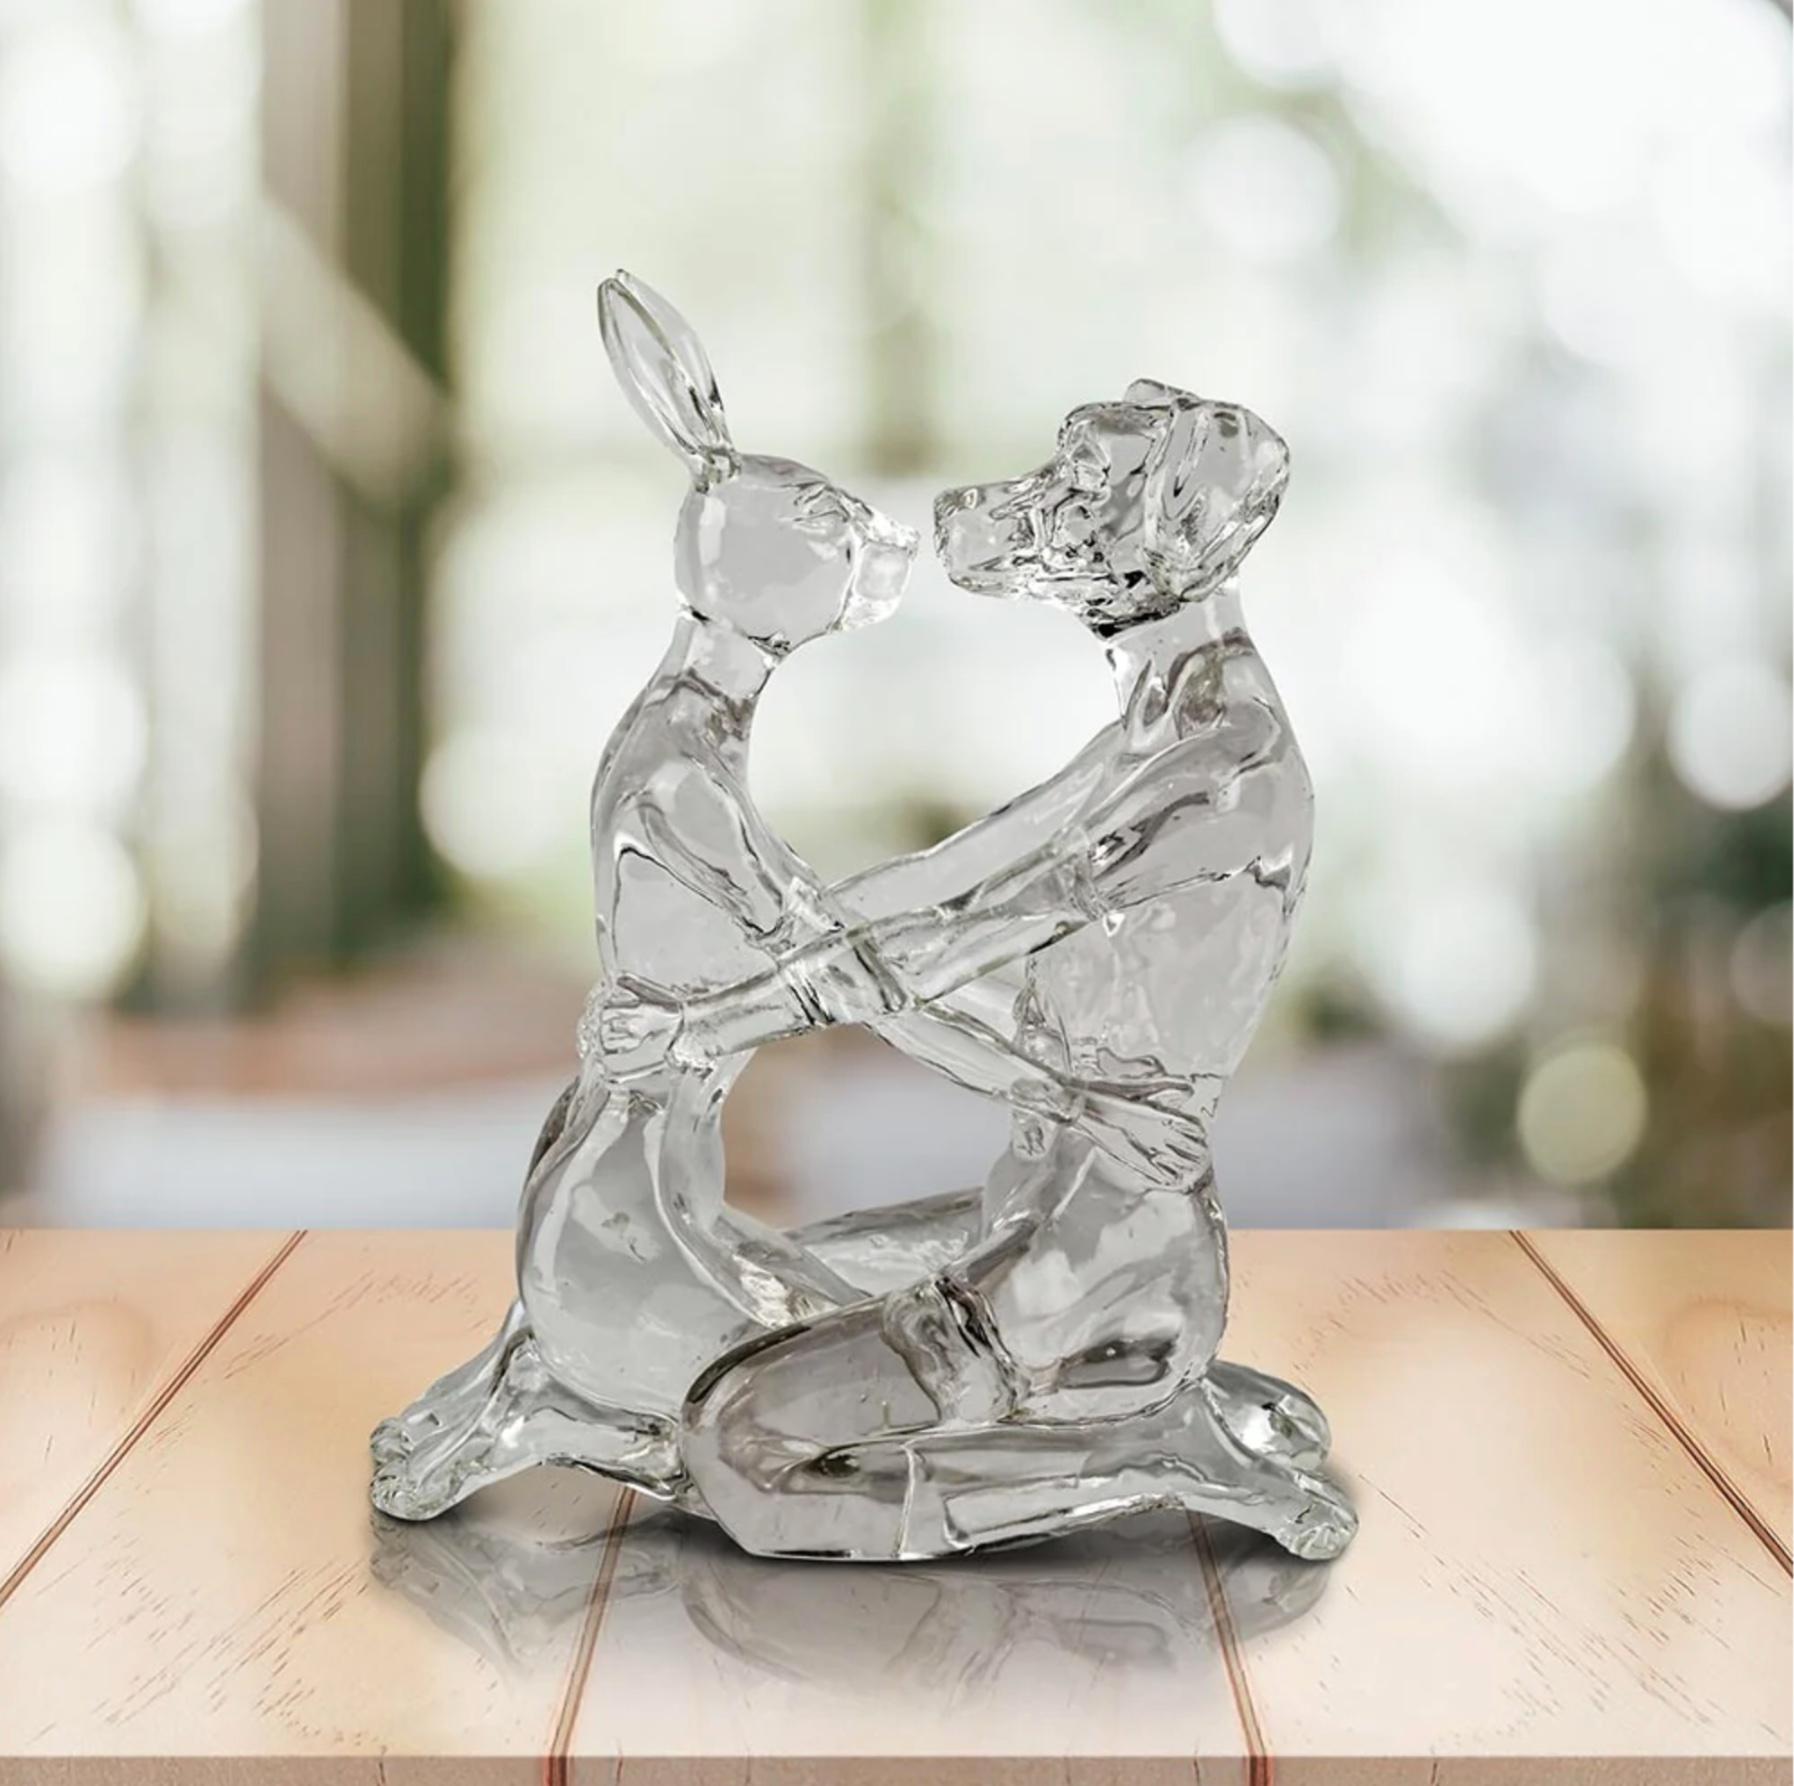 Title: They Were the Best Lolly Kissers (Clear)
Authentic Resin Sculpture

This authentic bronze sculpture titled 'They Were the Best Lolly Kissers' in Clear by artists Gillie and Marc has been meticulously crafted in resin. This sculpture features